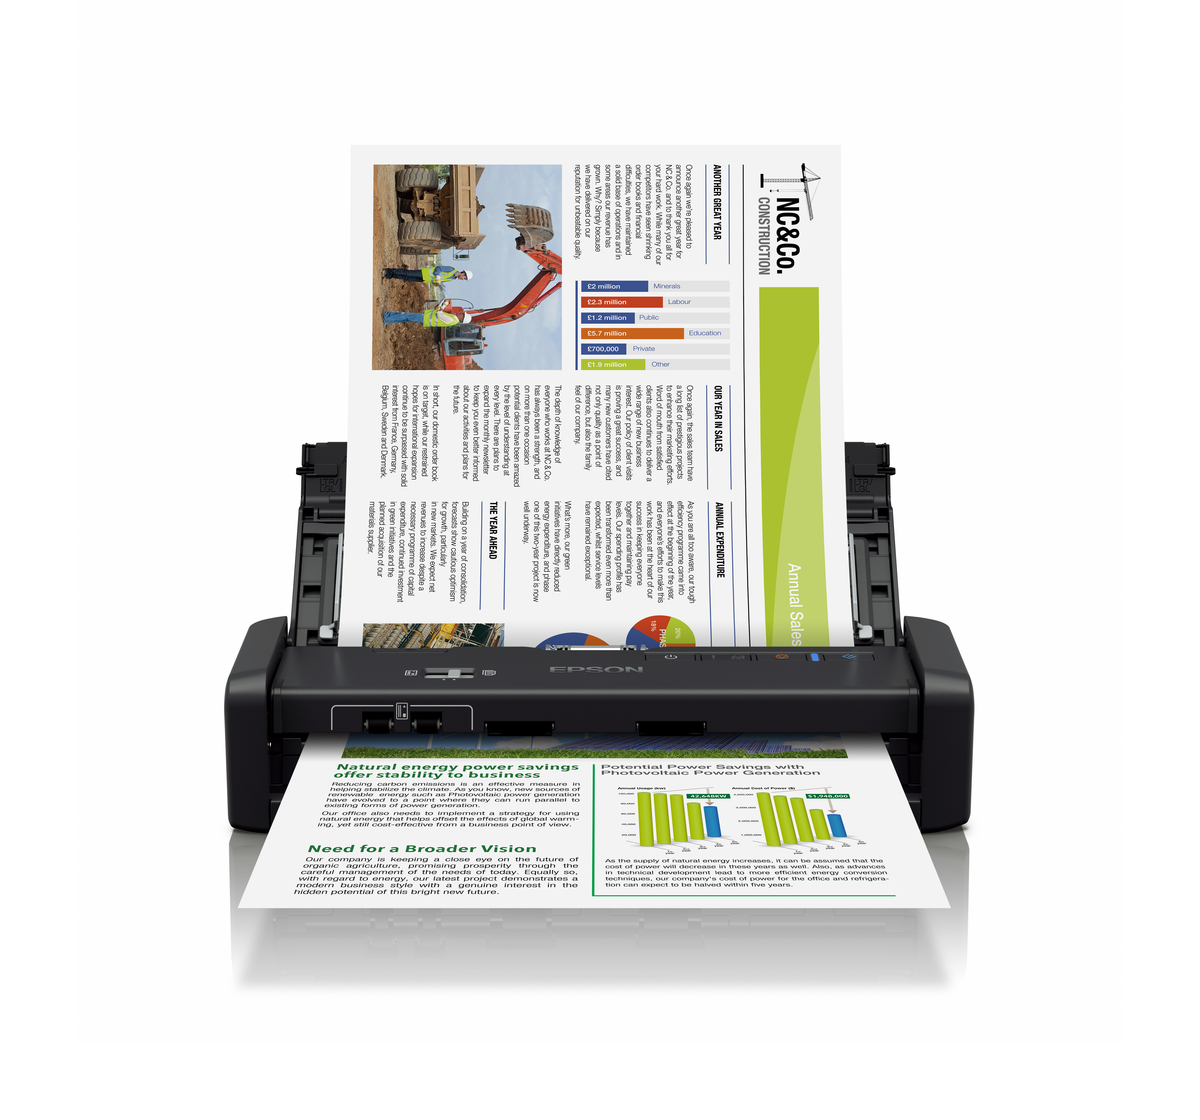 Epson WorkForce DS-360W Wi-Fi Portable Sheet-fed Document Scanner